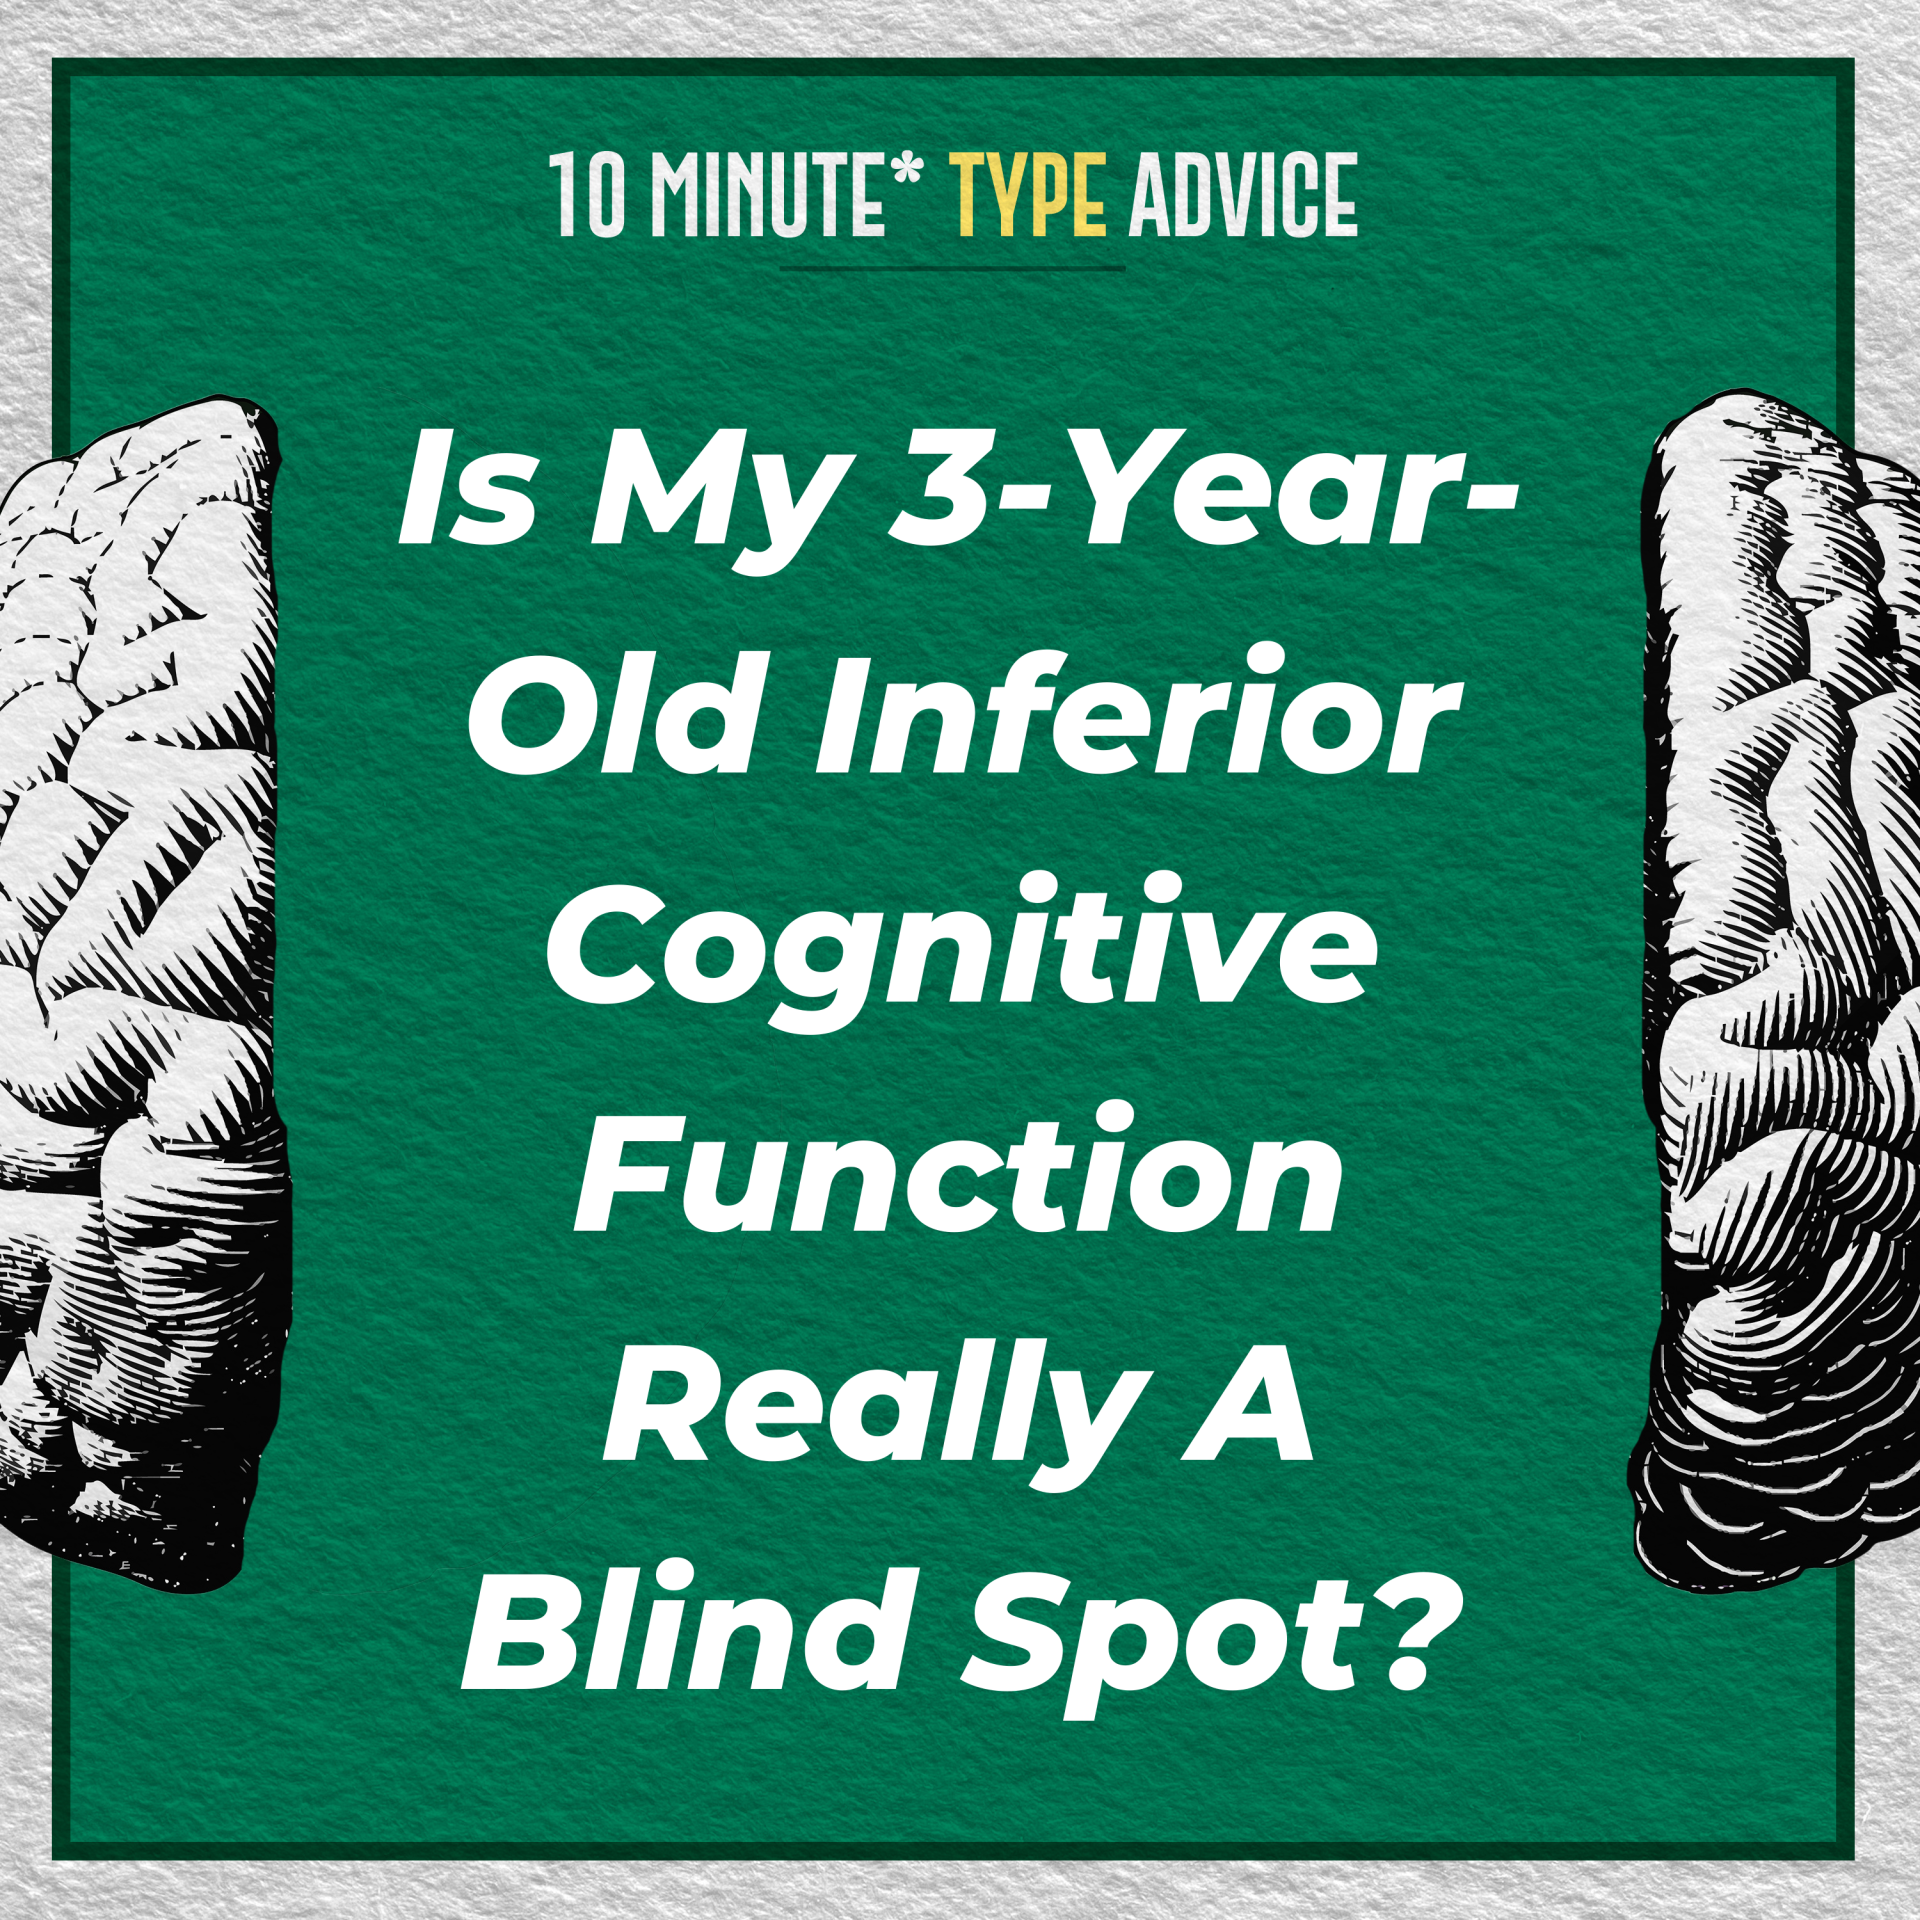 Is My 3-Year-Old Inferior Cognitive Function Really A Blind Spot? | 10 Min Type Advice | S02:E05